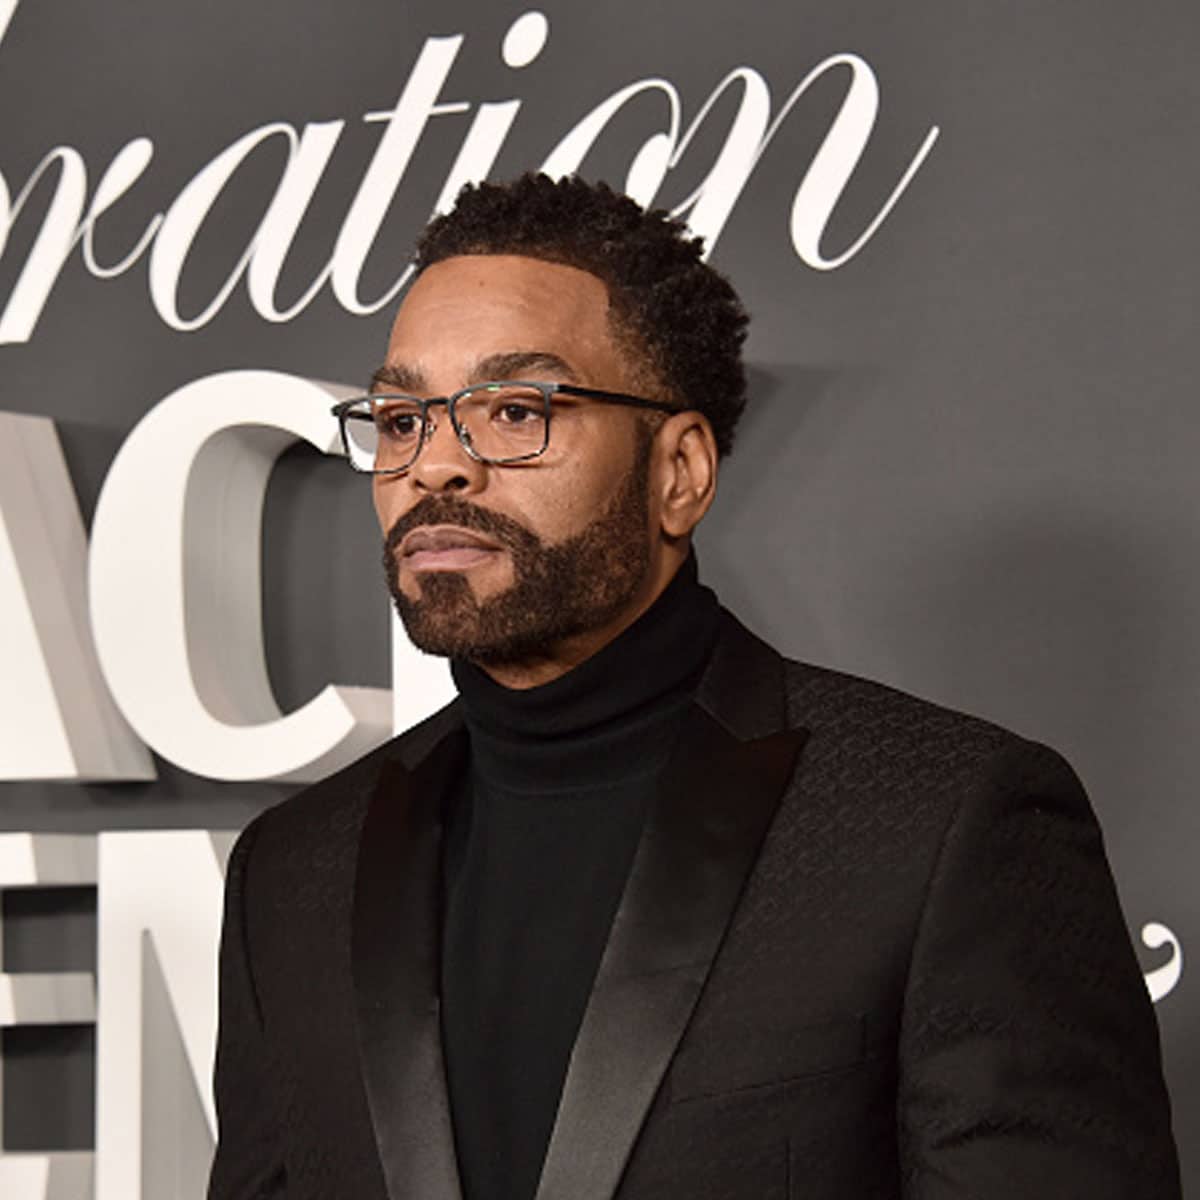 Cliff "Method Man" Smith attends the Critics Choice Association Presents The 4th Annual Celebration